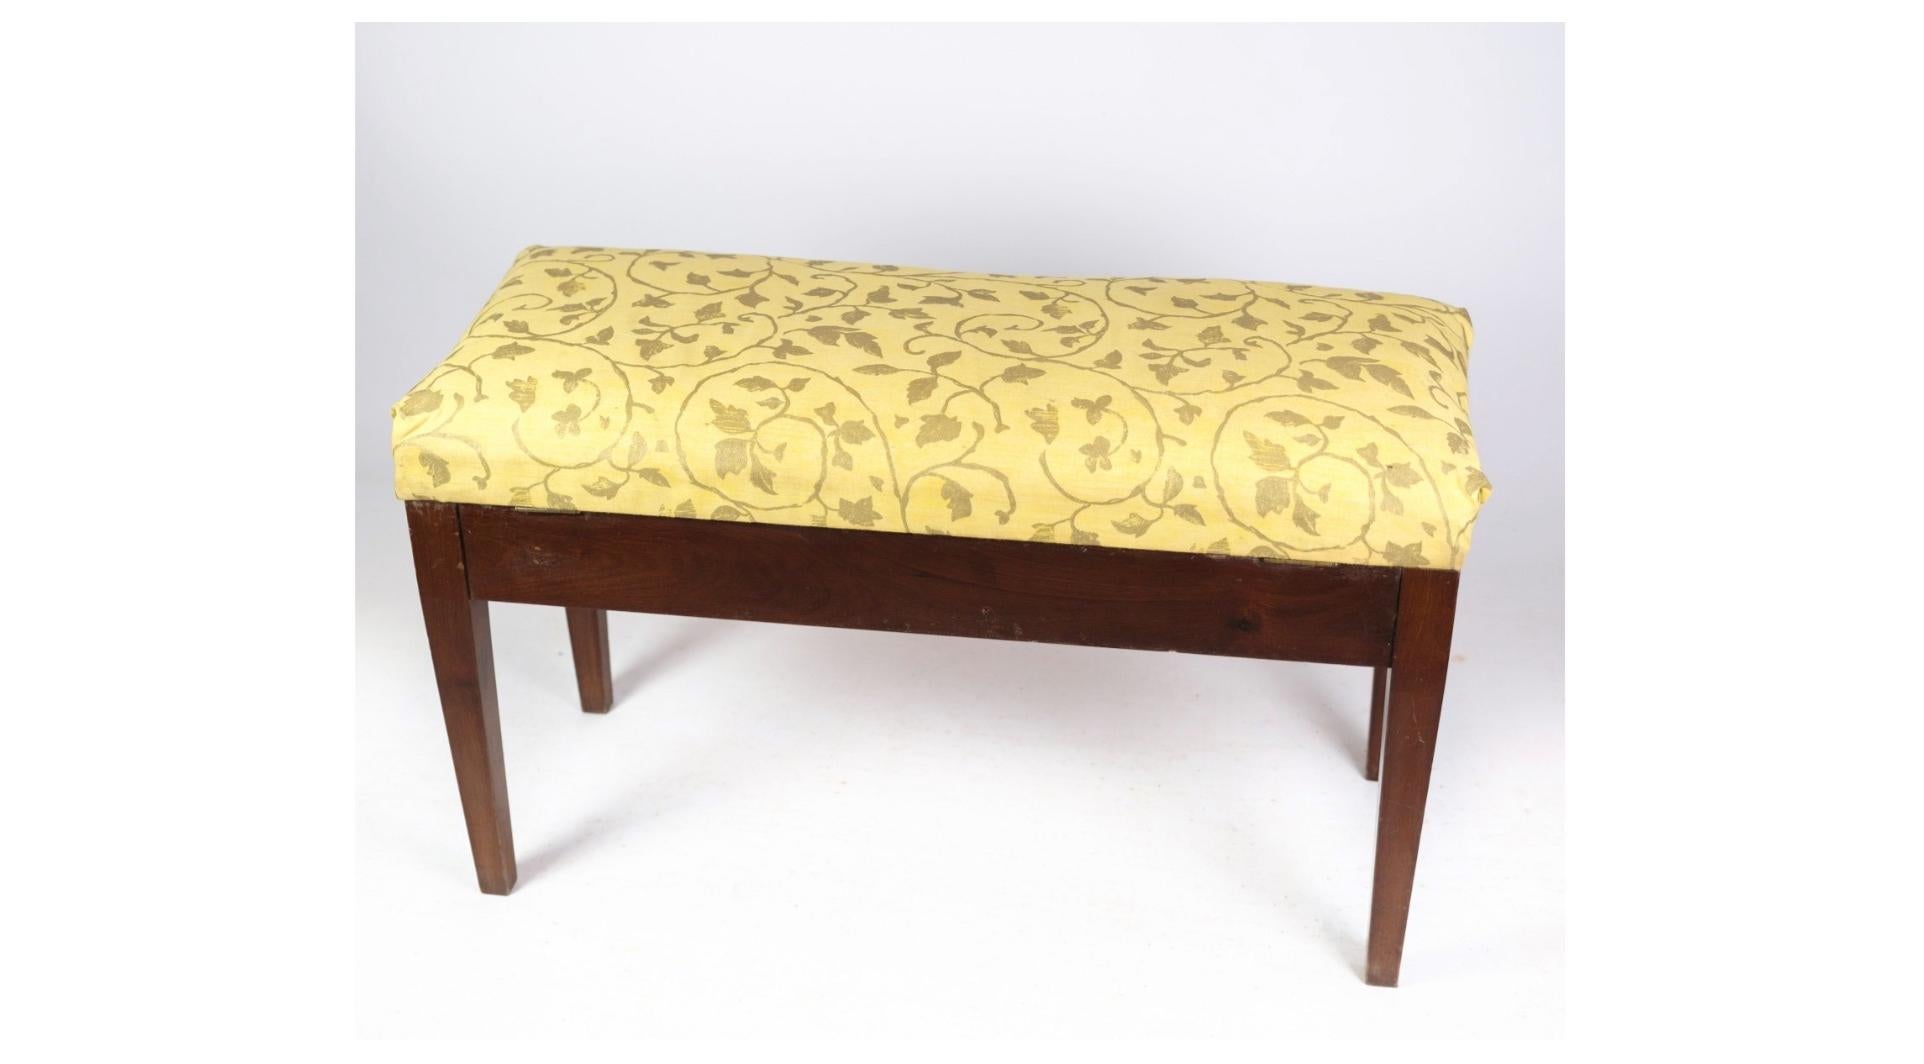 The piano bench or stool in mahogany with light floral fabric from around 1910 is a charming and elegant piece of furniture that exudes vintage charm and sophistication. Crafted from rich mahogany wood, known for its durability and warm tones, this